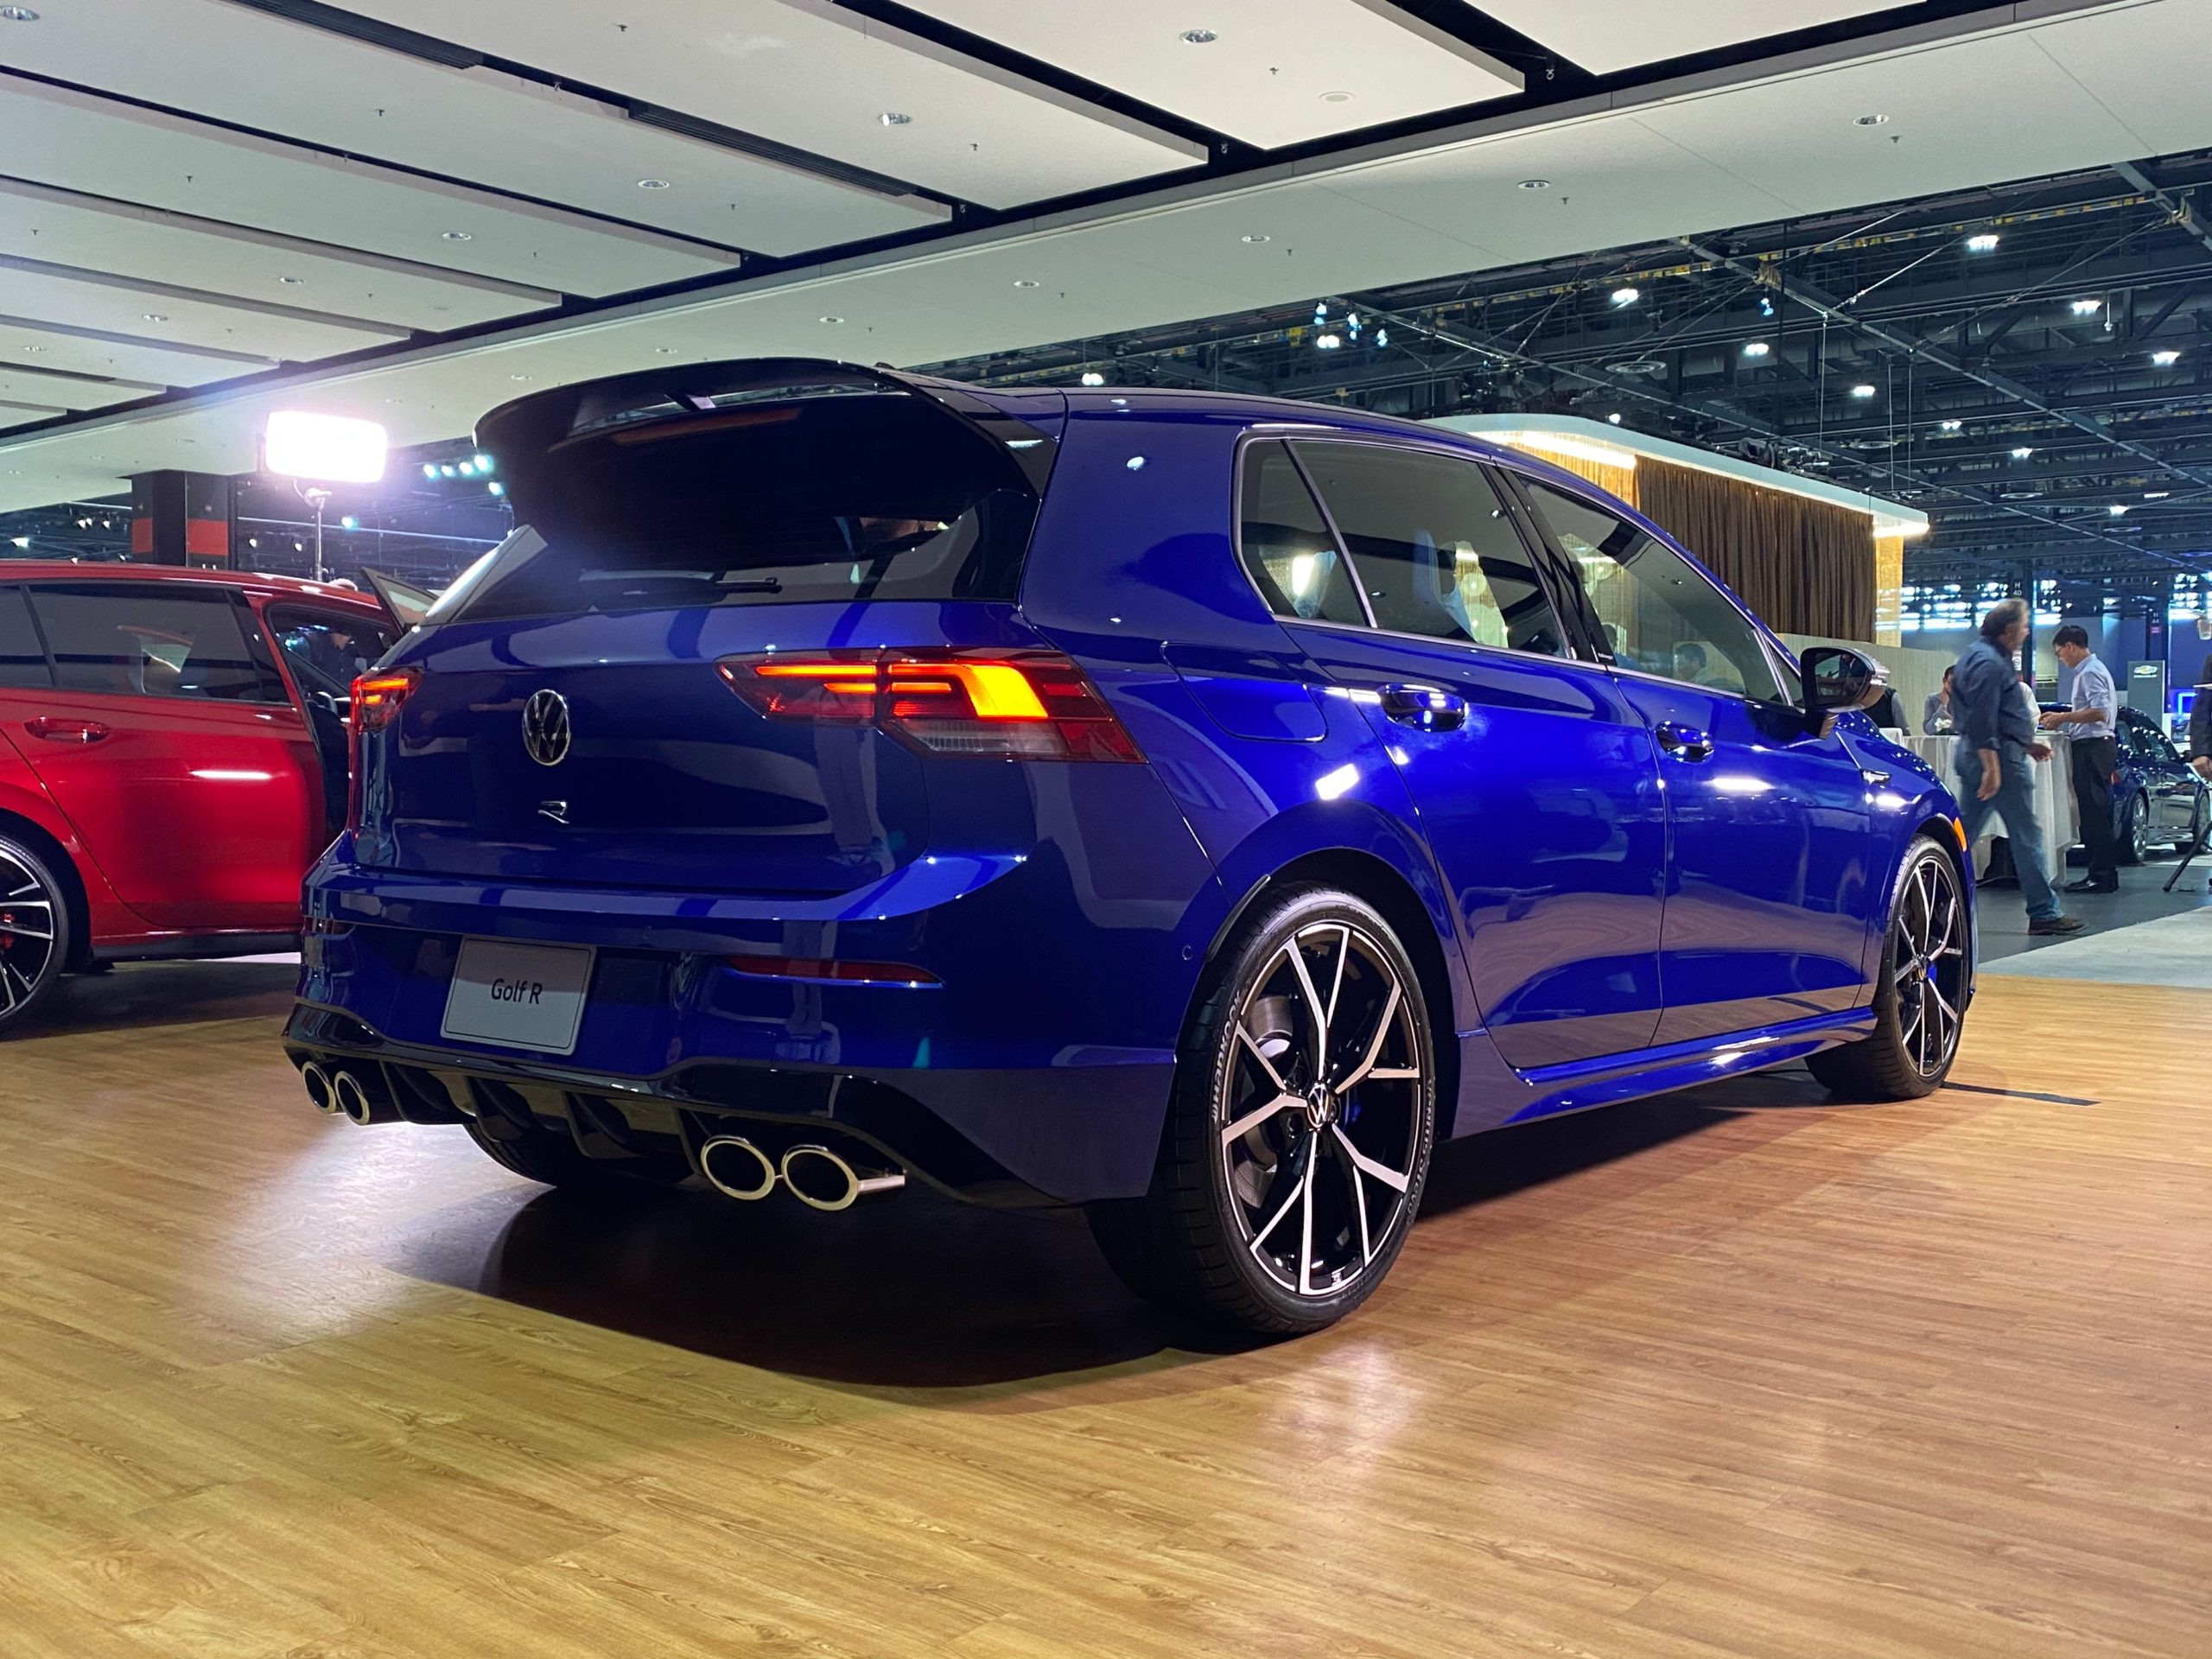 The 2022 Volkswagen Golf R Is A $43,645 Drift Machine With 315 HP